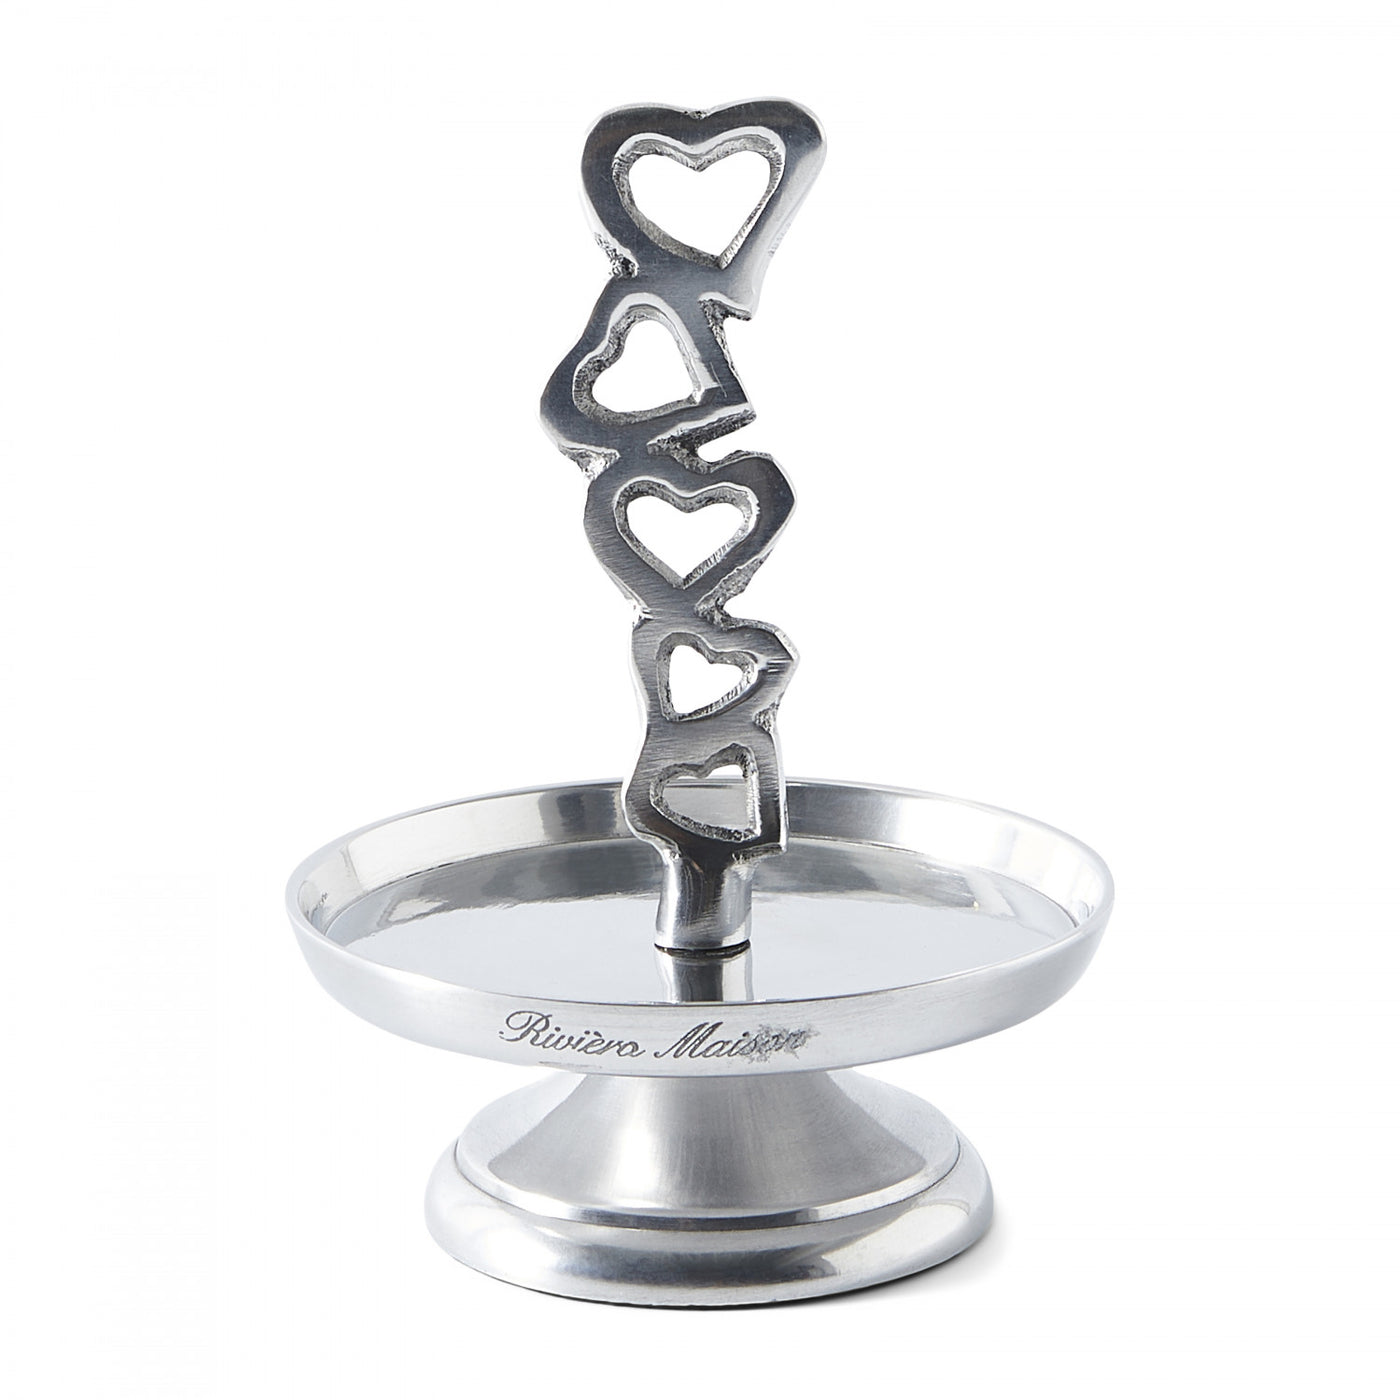 With Love Cake Stand S